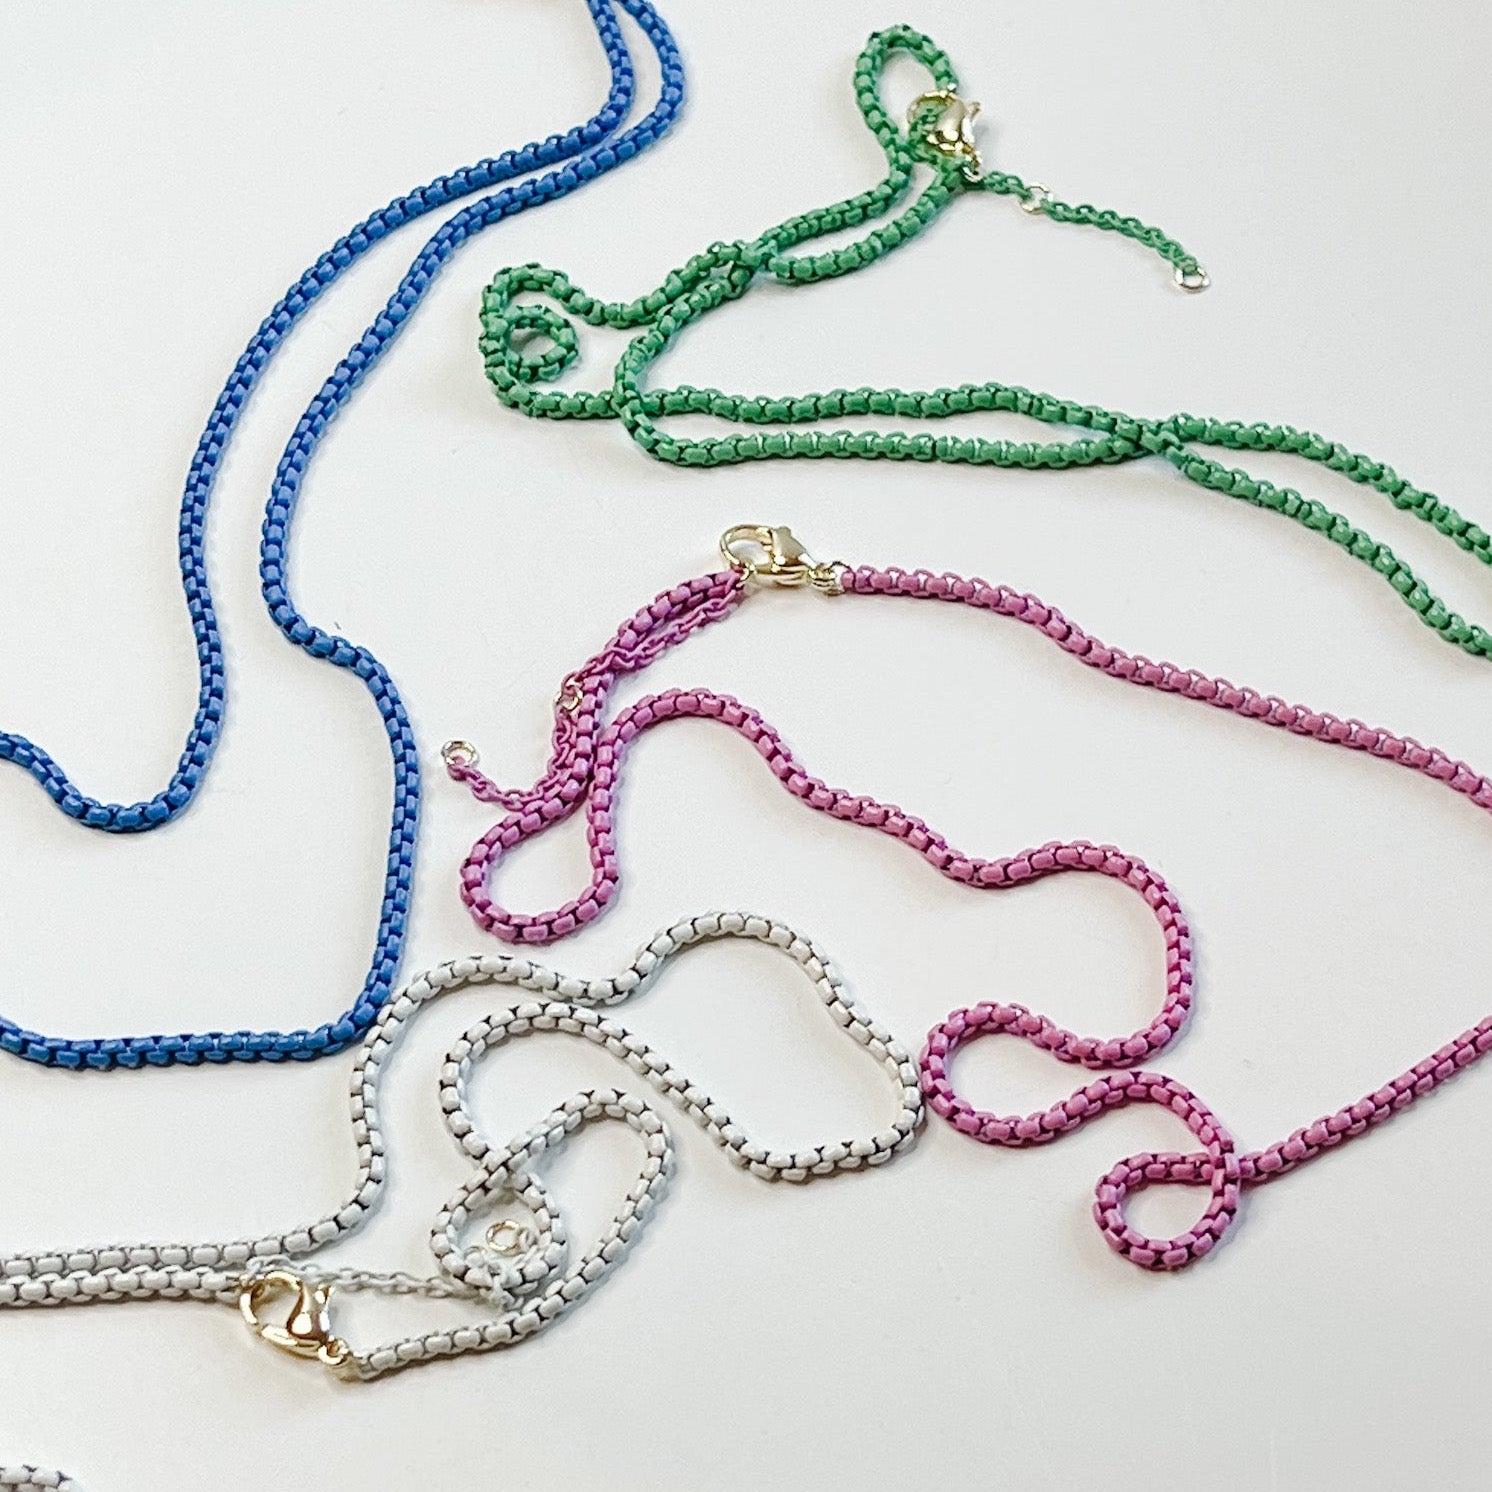  a unique colorful chain.   Available in Four Colors: Blue, Green, White, and Pink, 16"